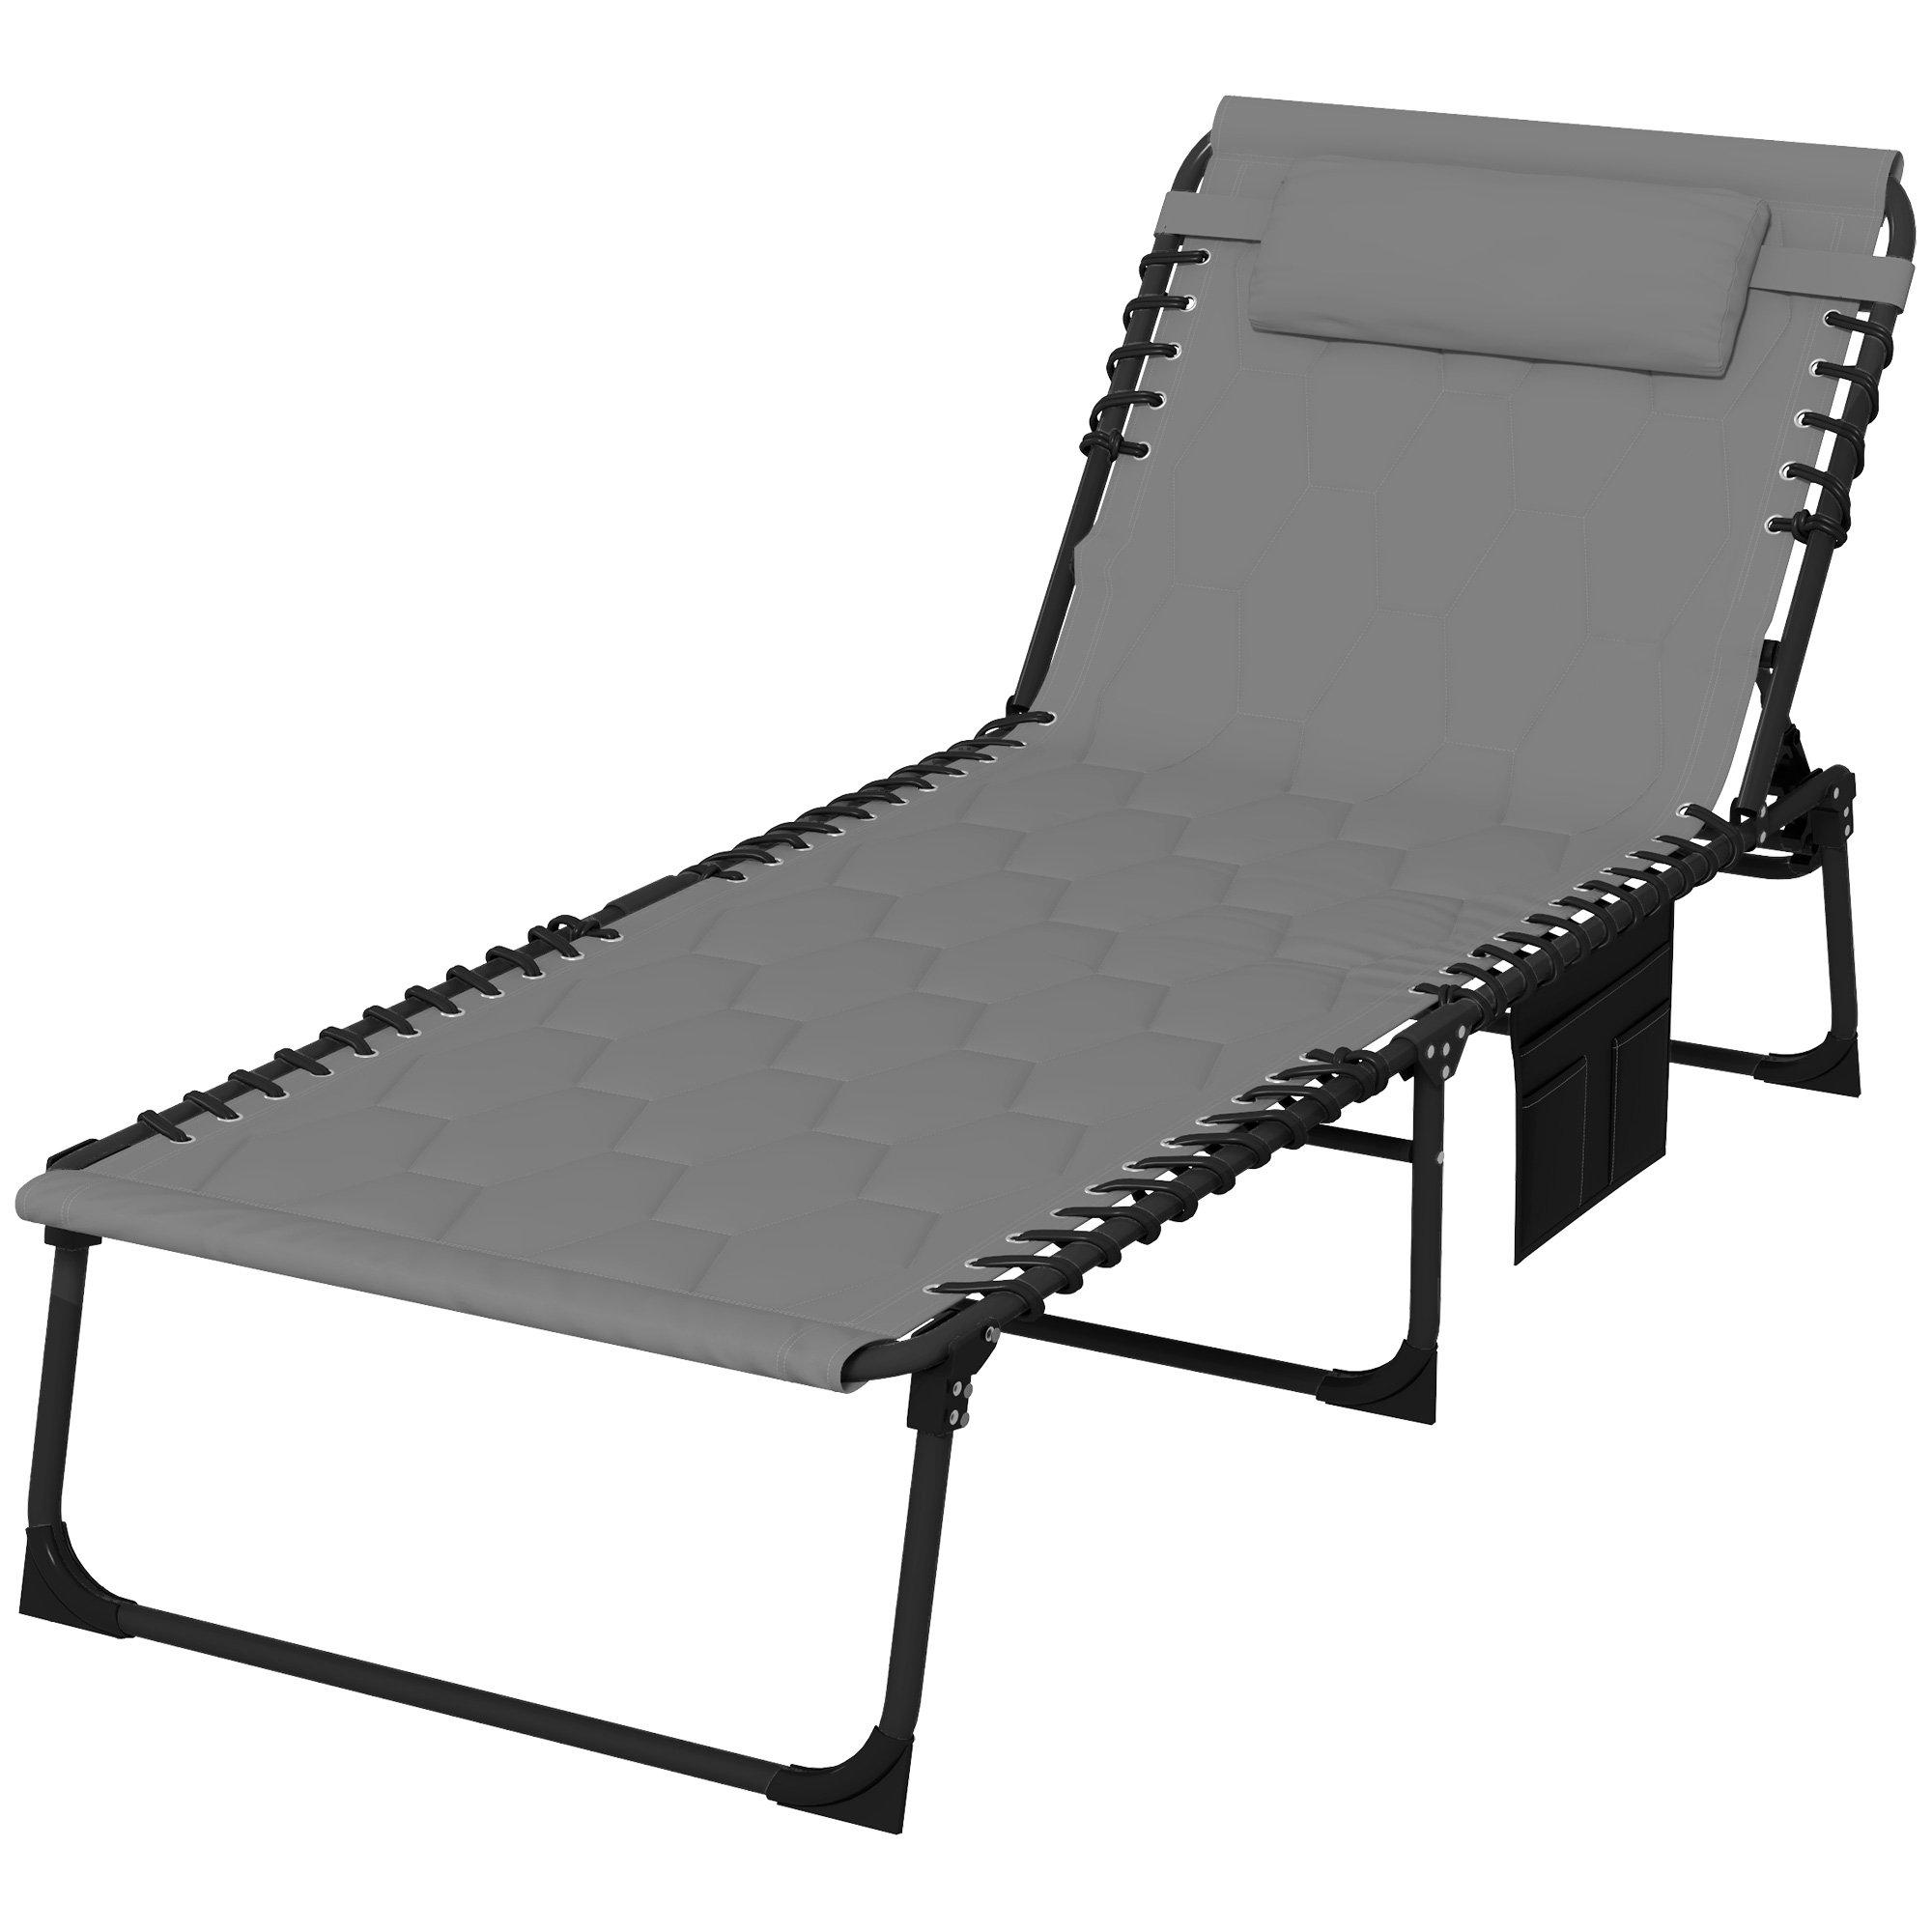 Foldable Sun Lounger with Reclining Back, Outdoor Sun Lounger with Padded Seat